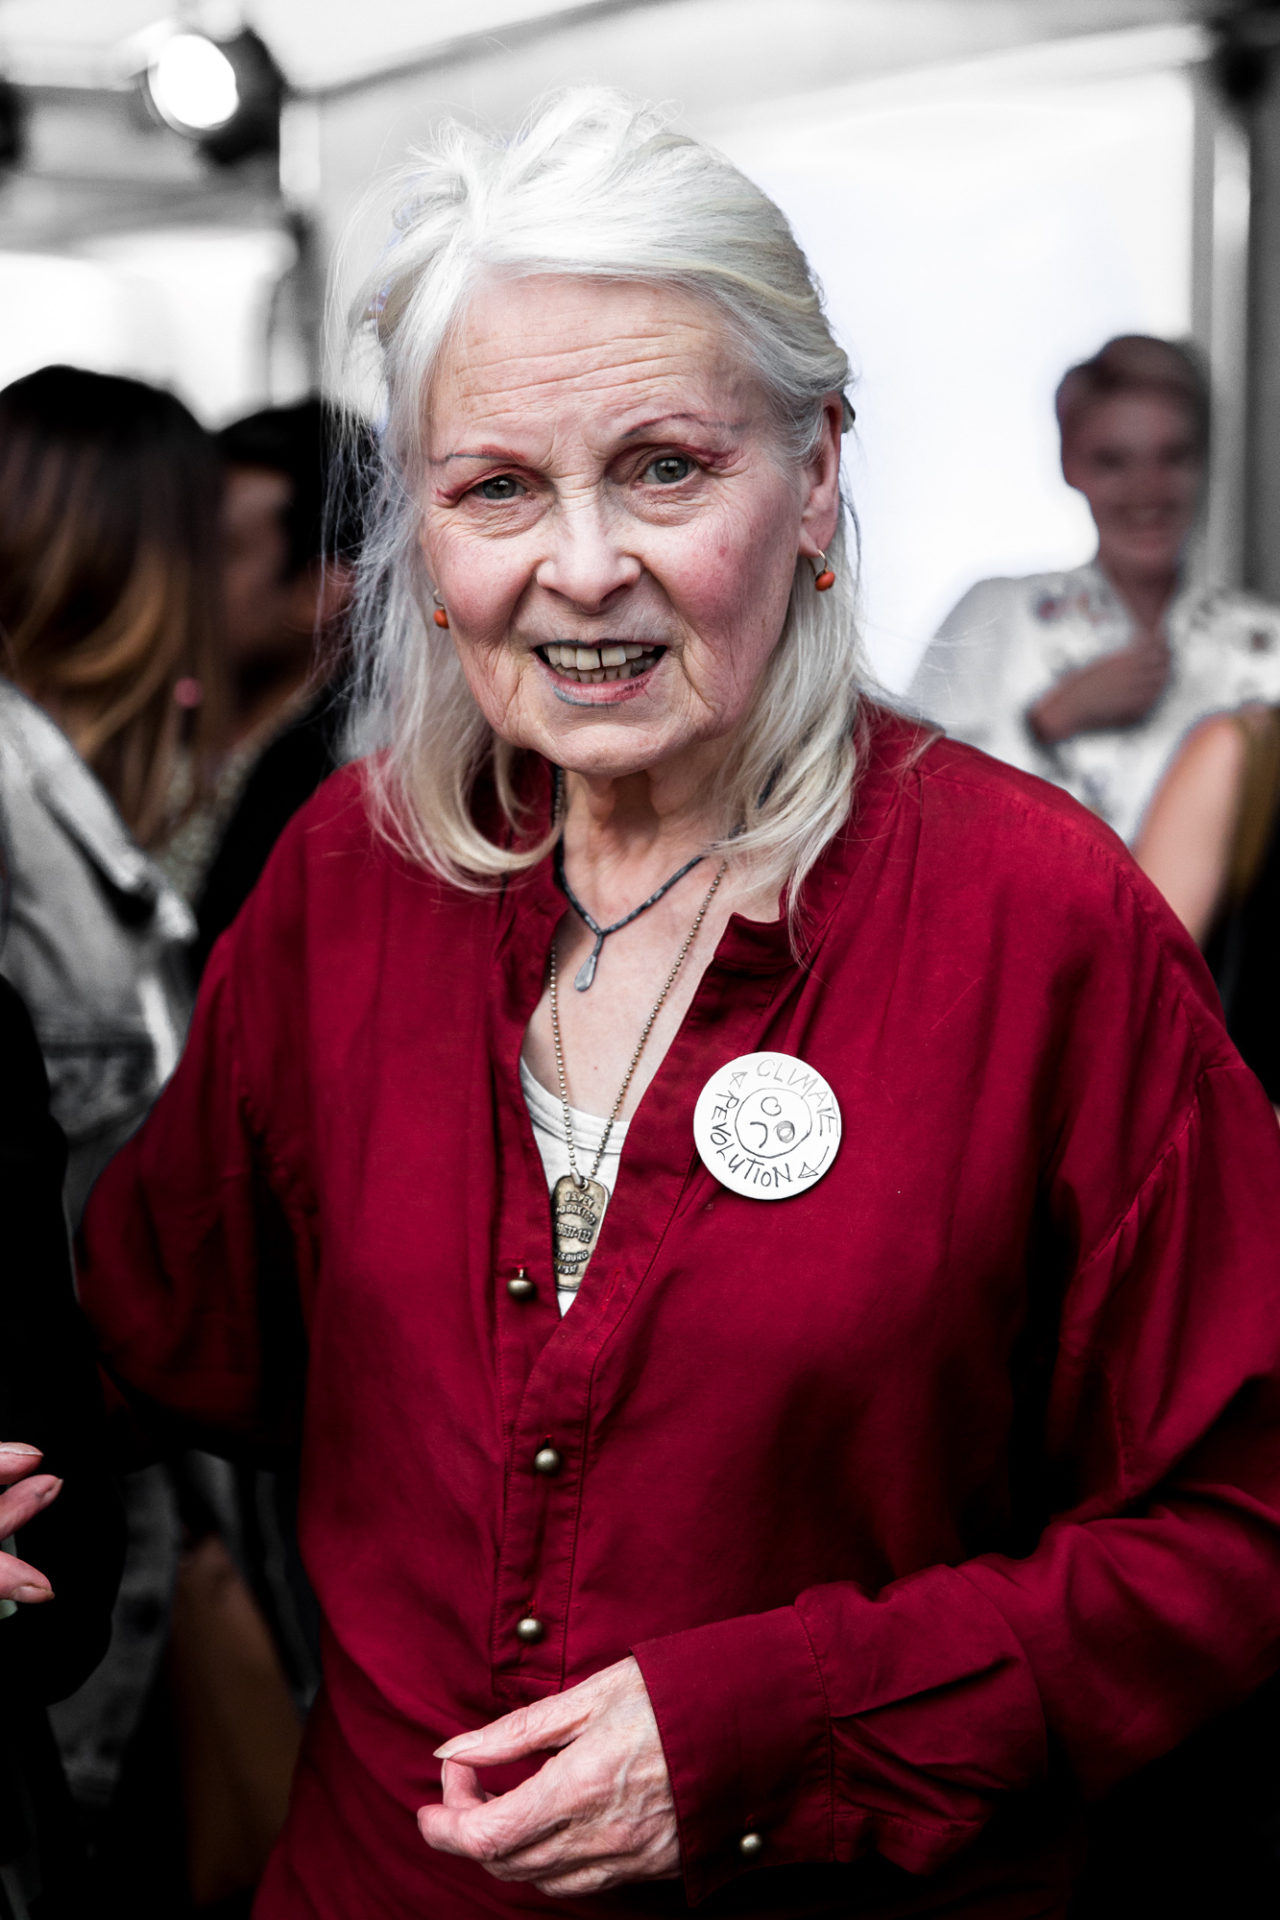 Vivienne Westwood at the Bread & Butter Pre Event in Berlin